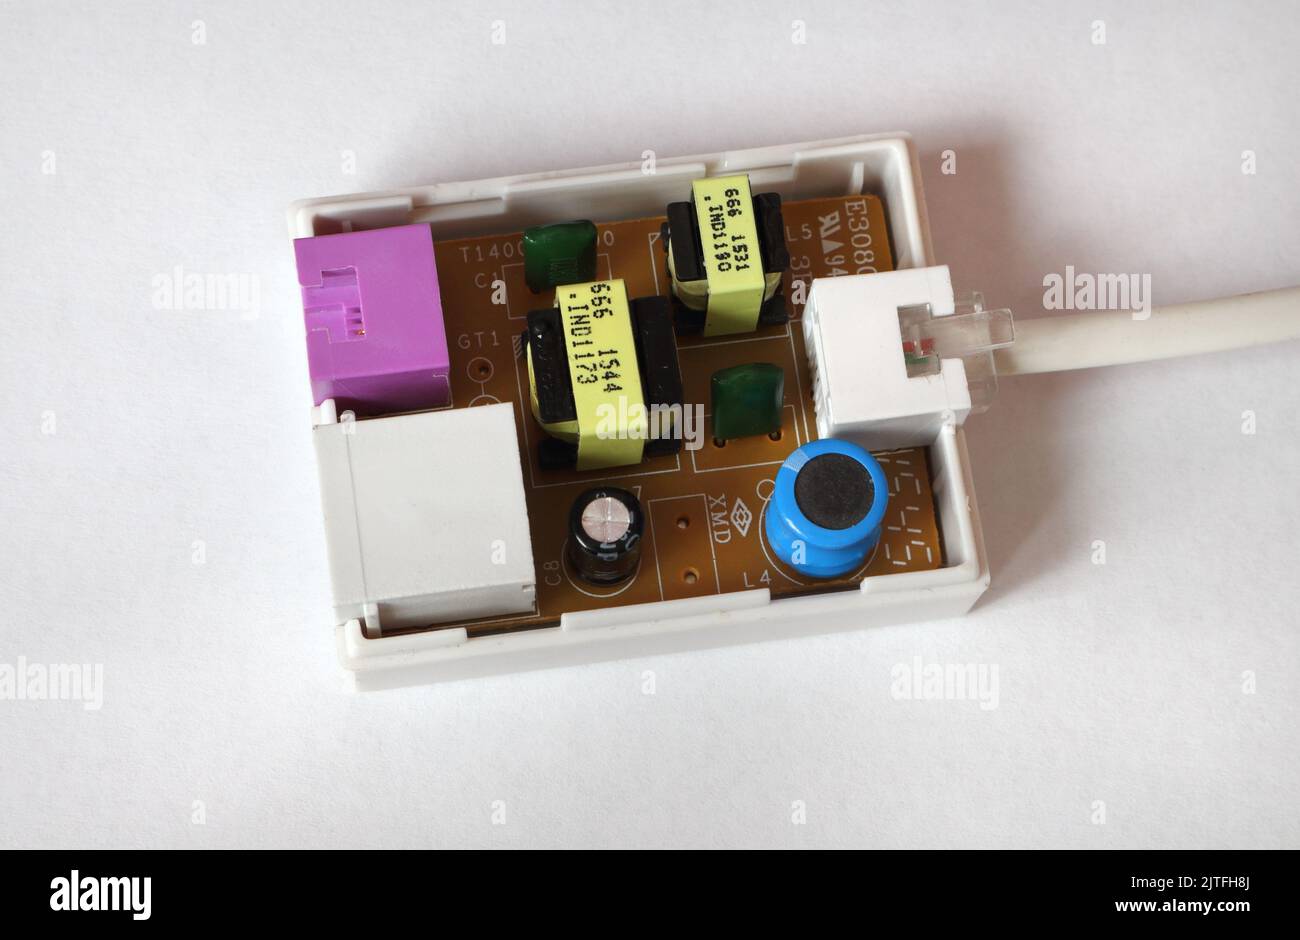 Broadband filter, telephone line filter, inside view showing electronic components Stock Photo